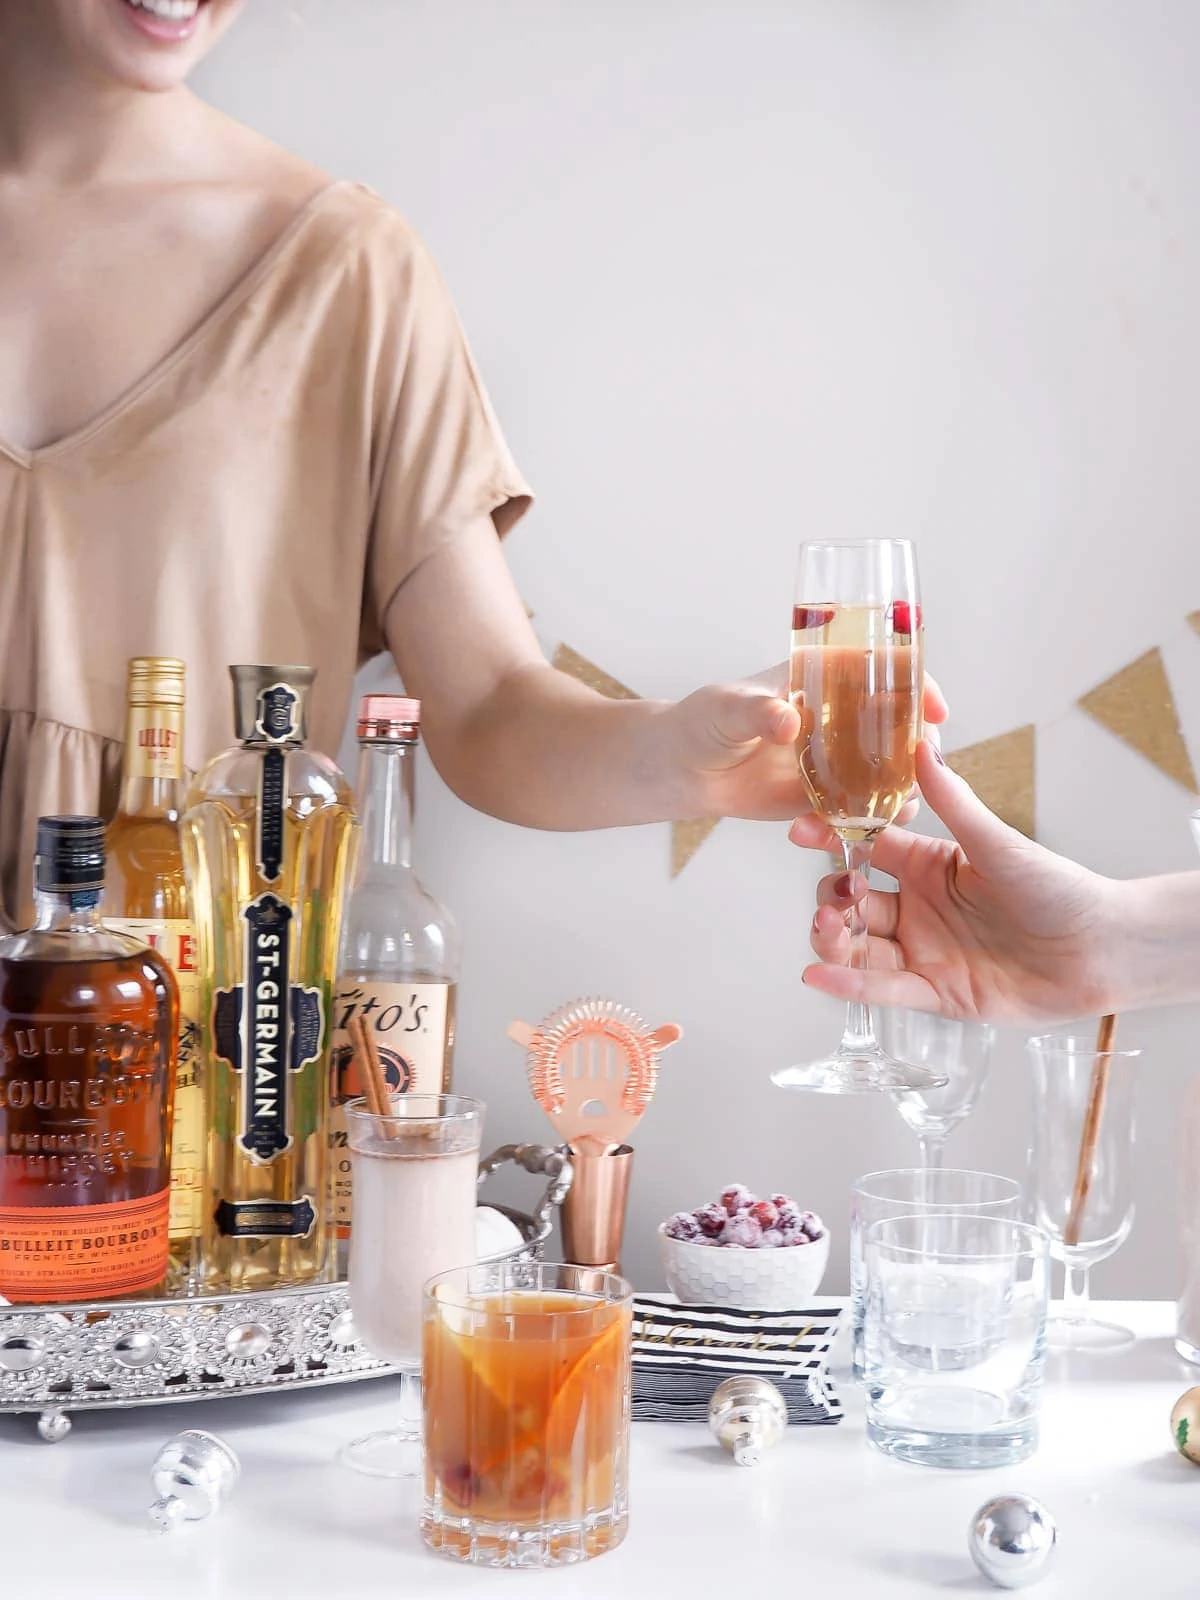 https://bromabakery.com/wp-content/uploads/2015/12/Cocktail-Party-7.webp